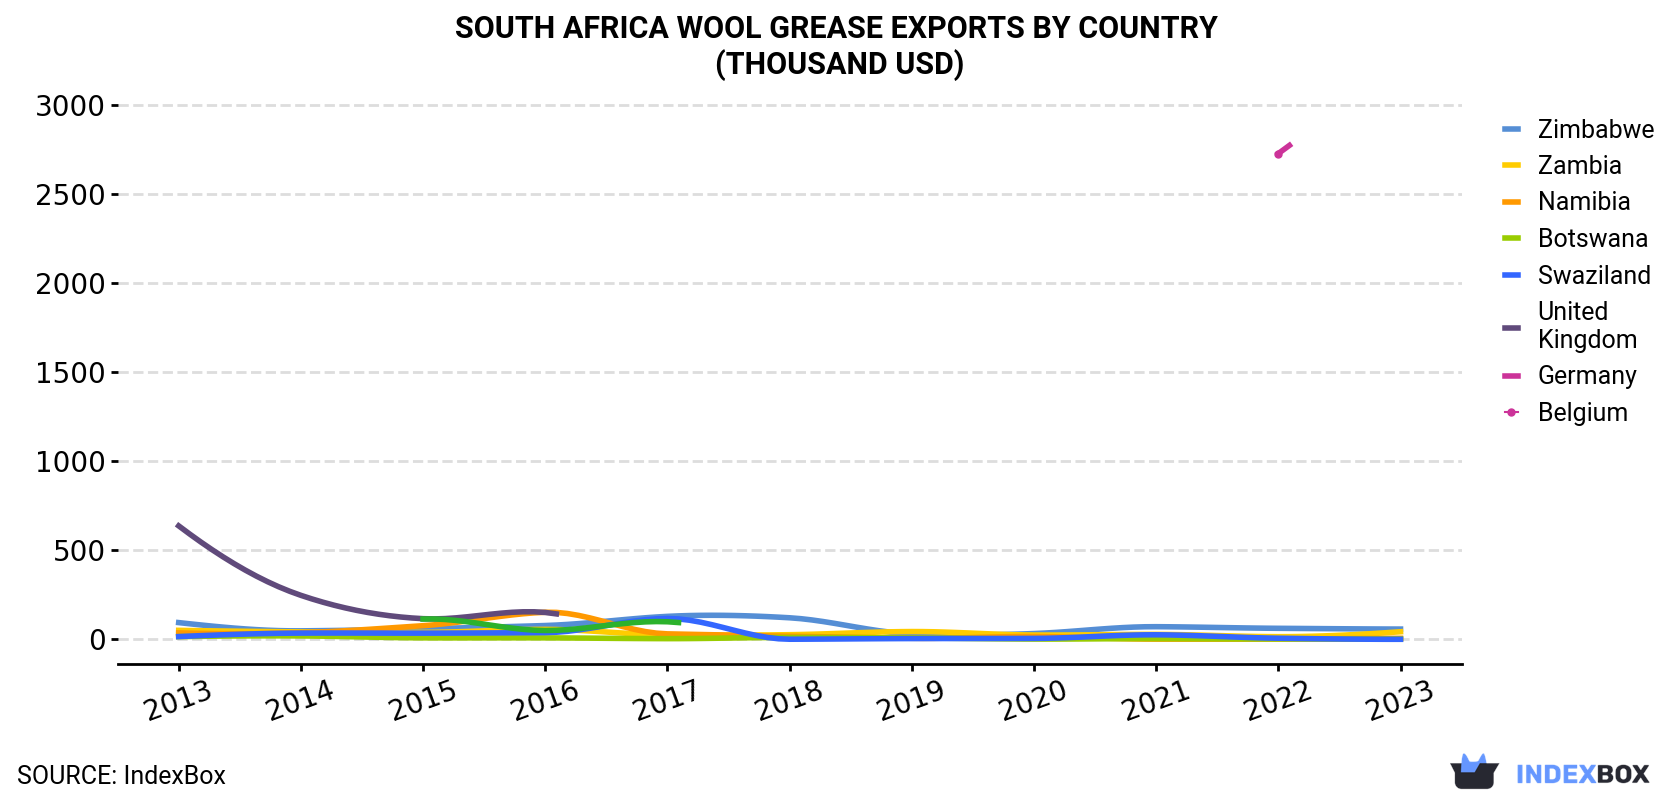 South Africa Wool Grease Exports By Country (Thousand USD)